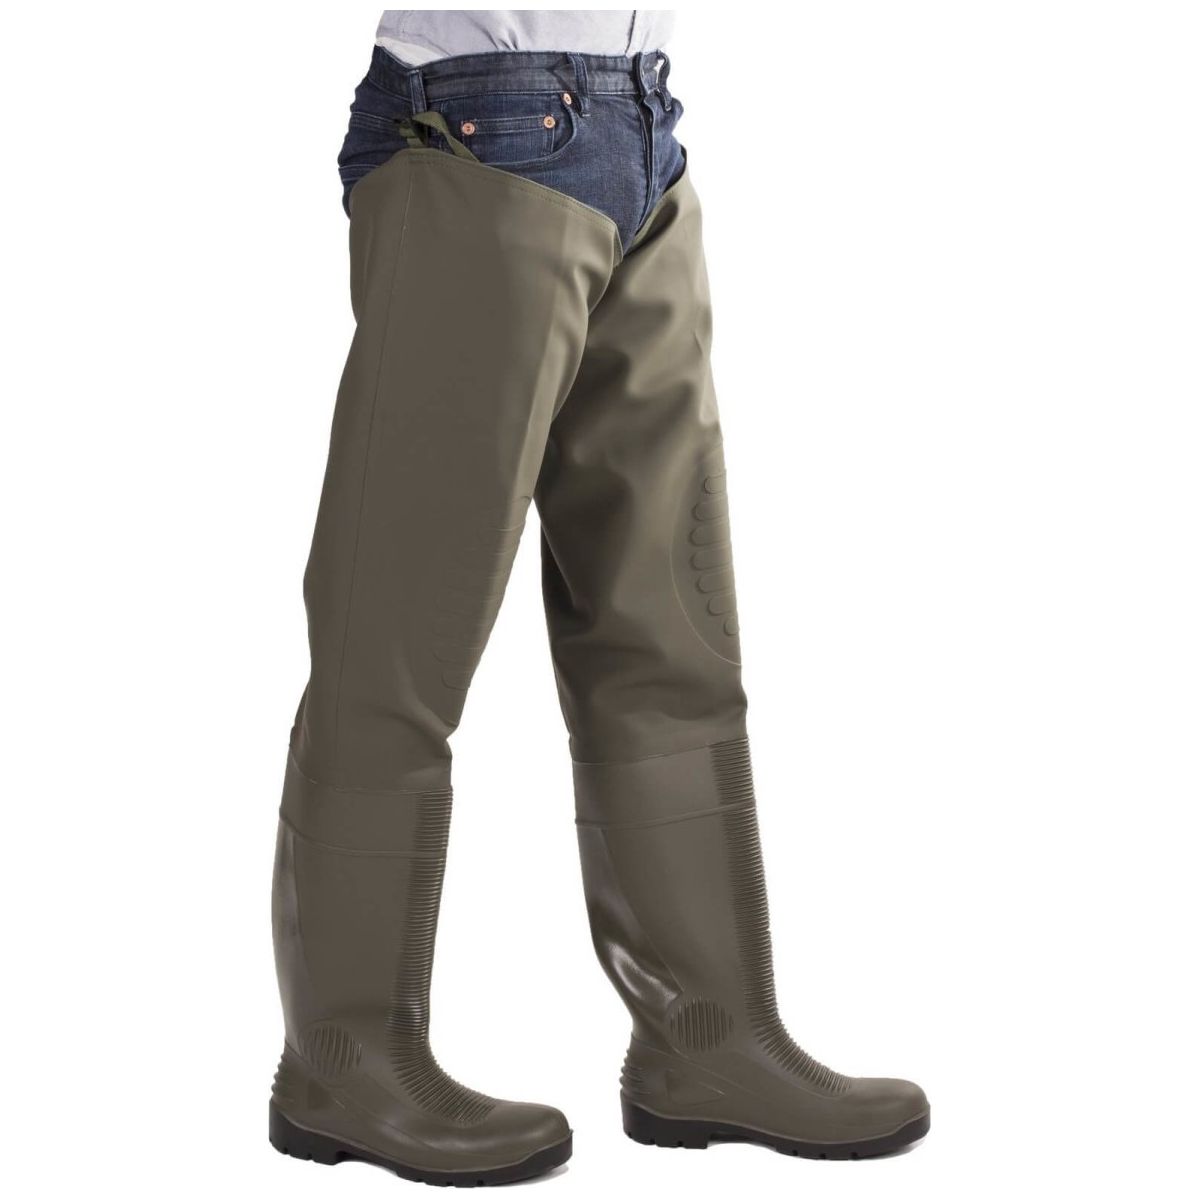 Amblers Forth Thigh Safety Waders Mens - workweargurus.com